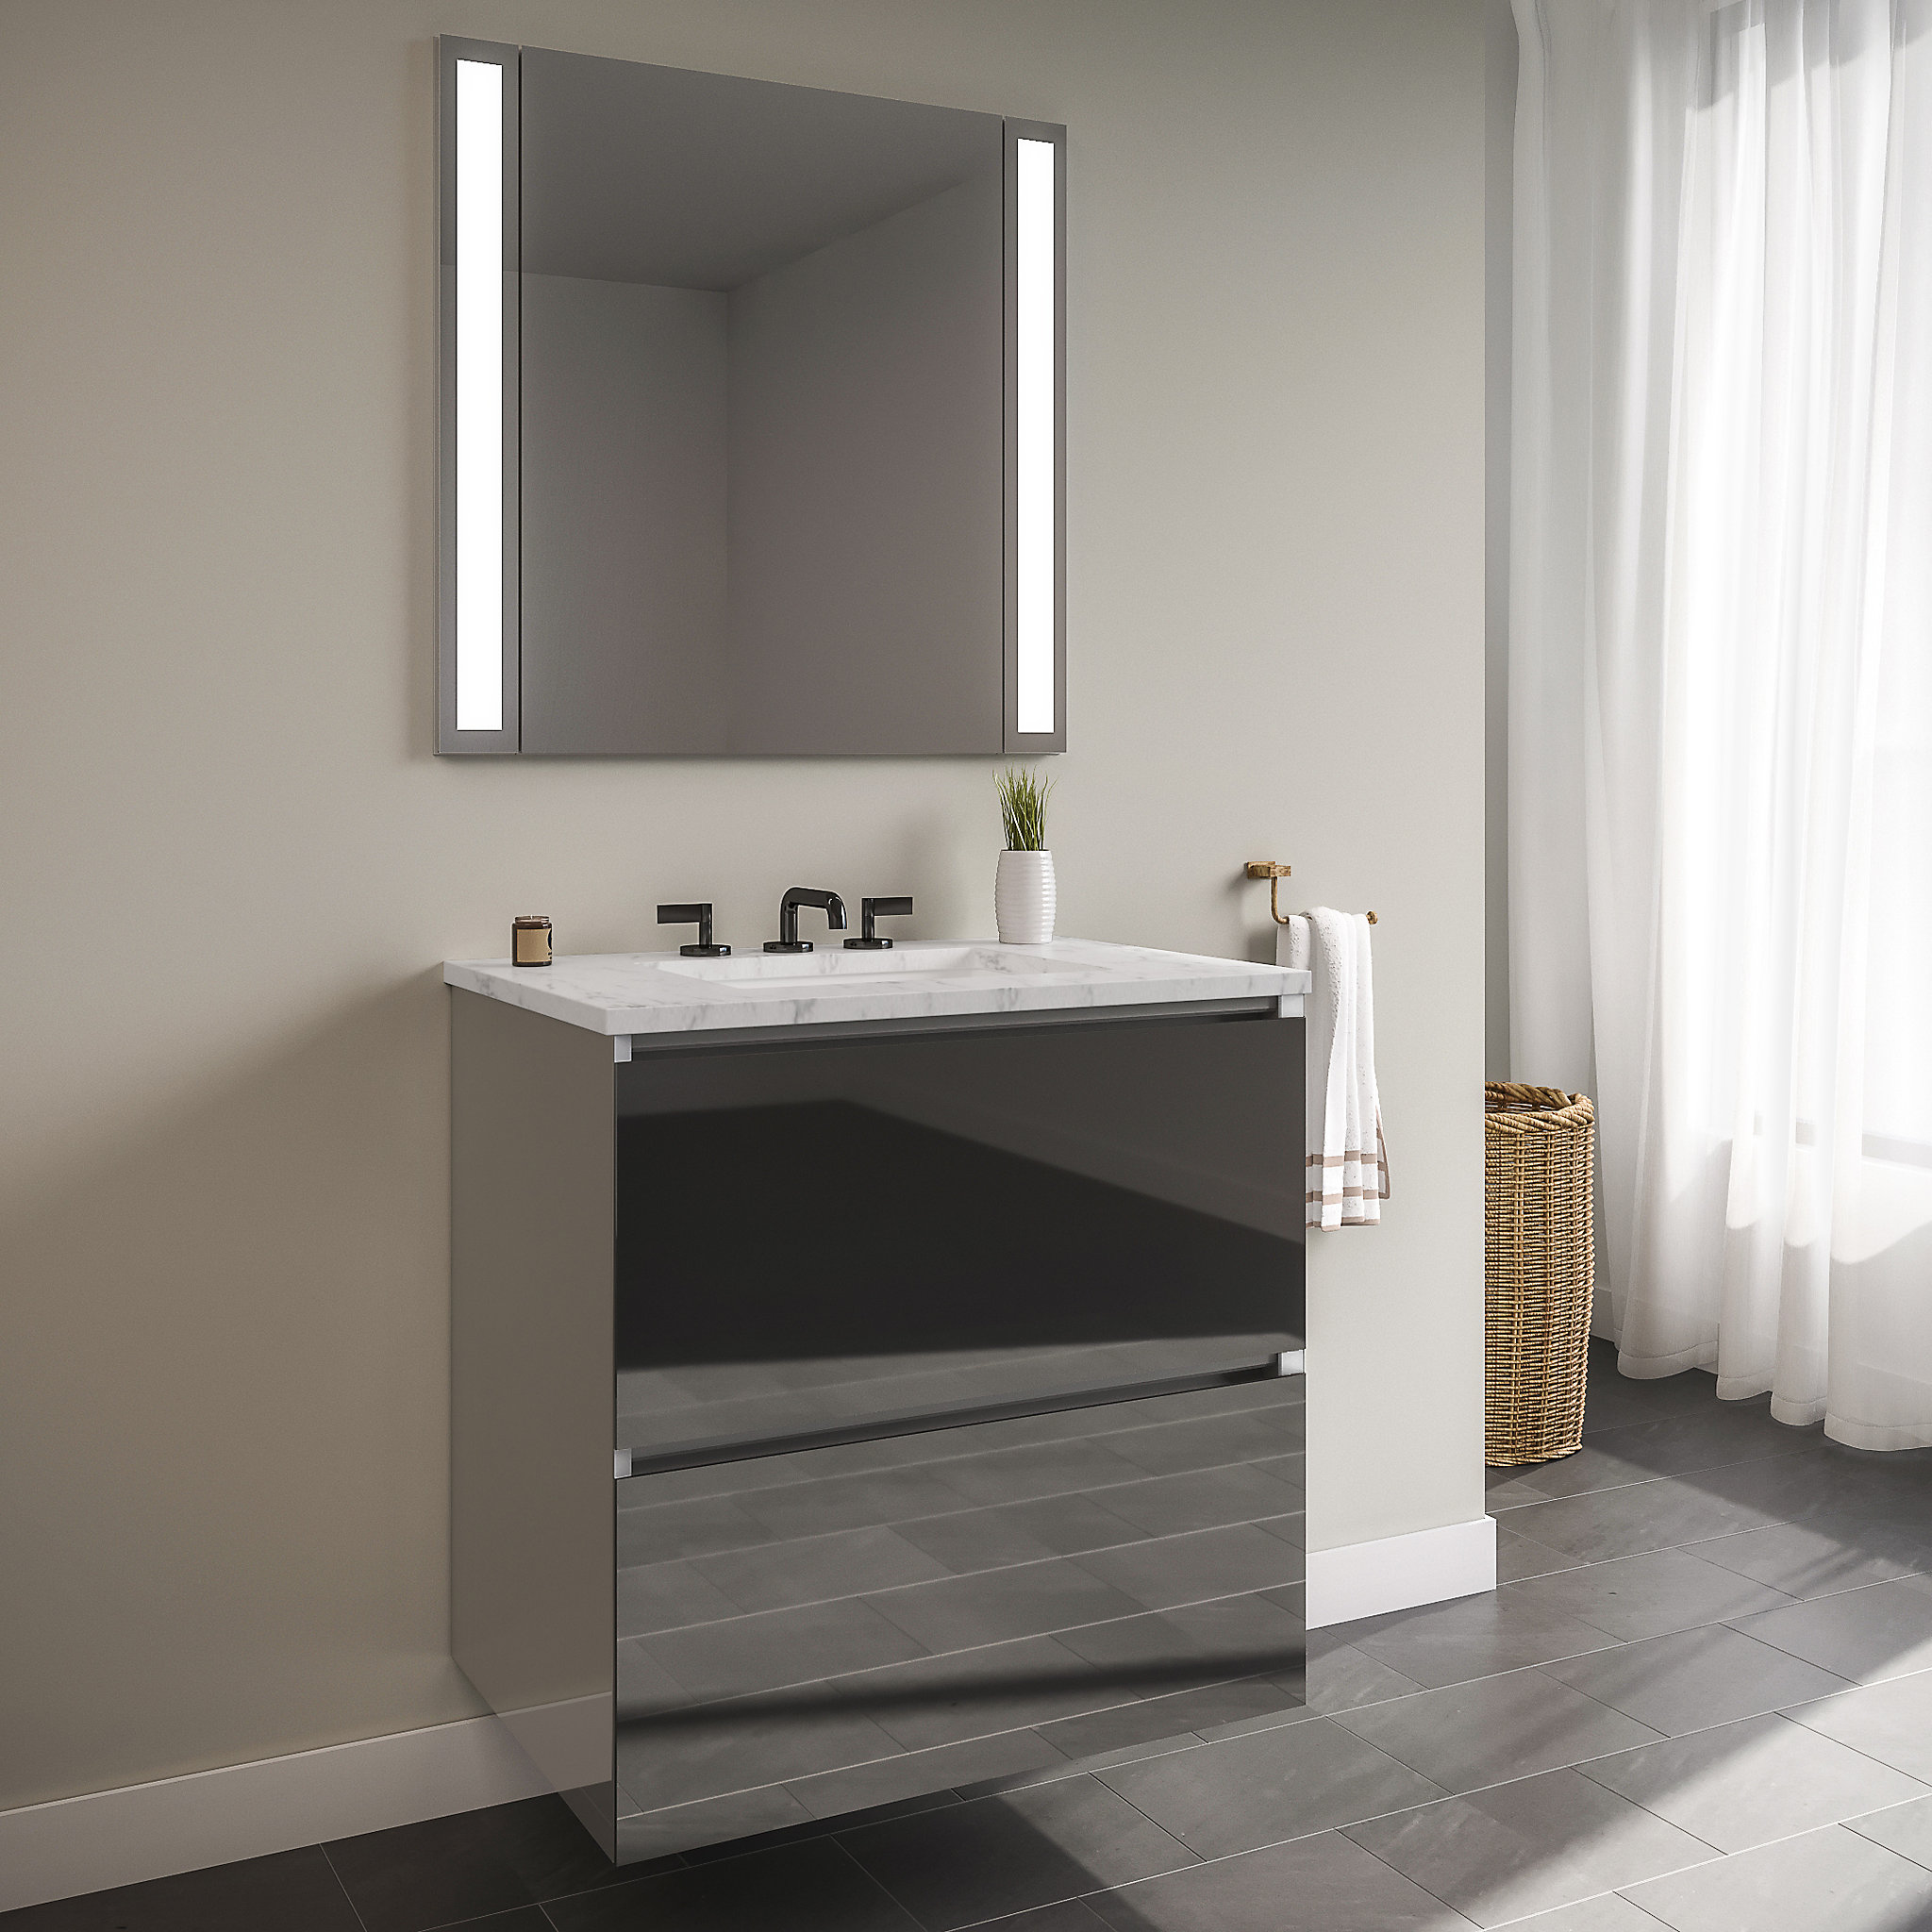 Robern 36119400NB00002 Curated Cartesian Vanity, 36" x 15" x 21", Two Drawer, Tinted Gray Mirror Glass, Plumbing Drawer, Full Dr